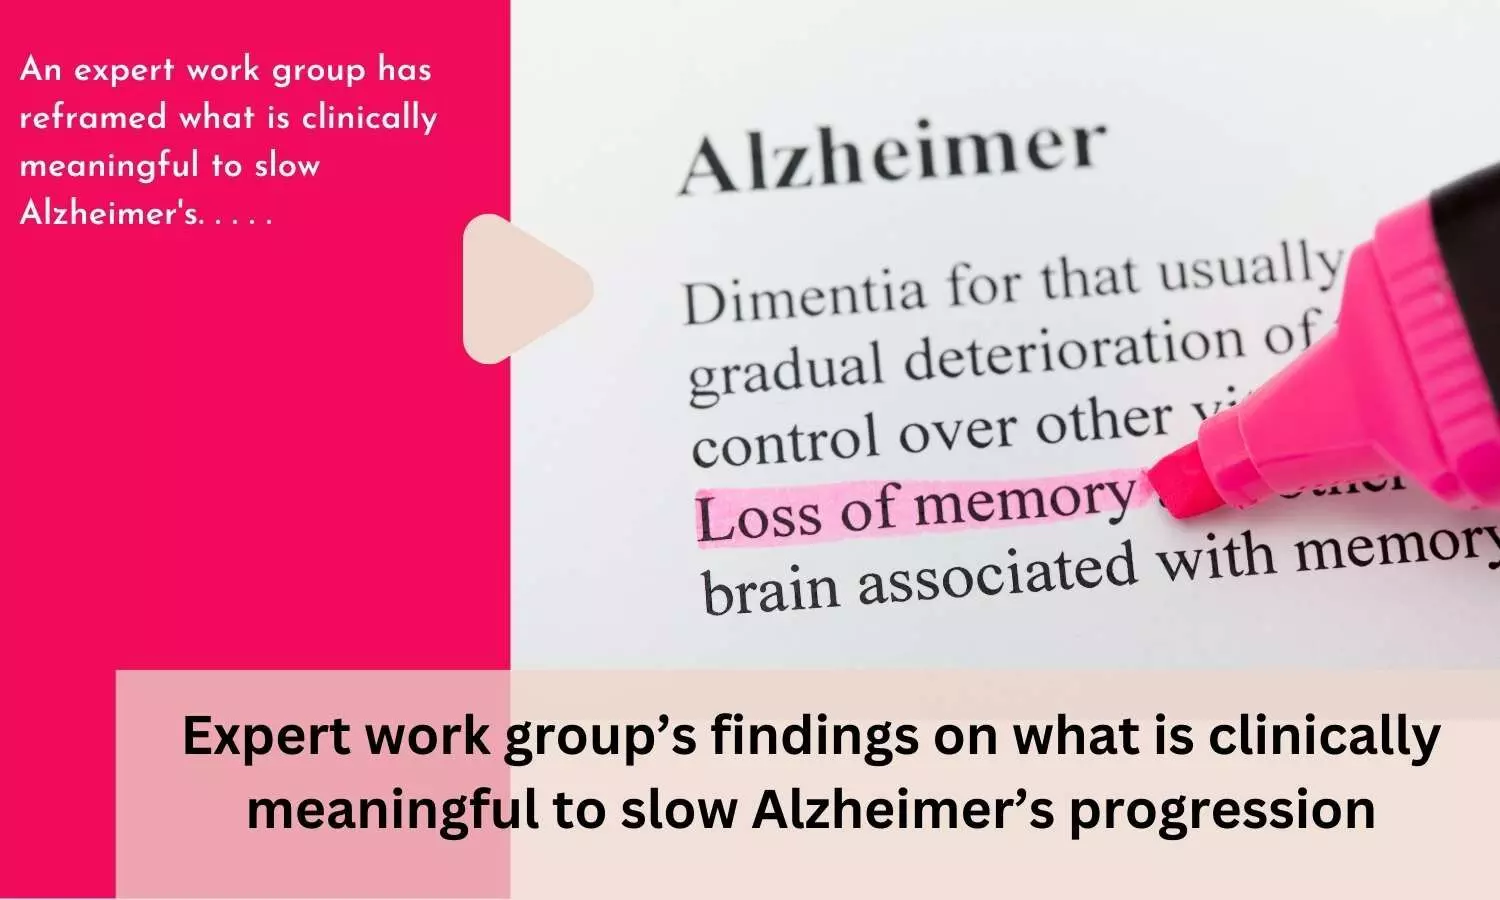 Expert work groups findings on what is clinically meaningful to slow Alzheimers progression